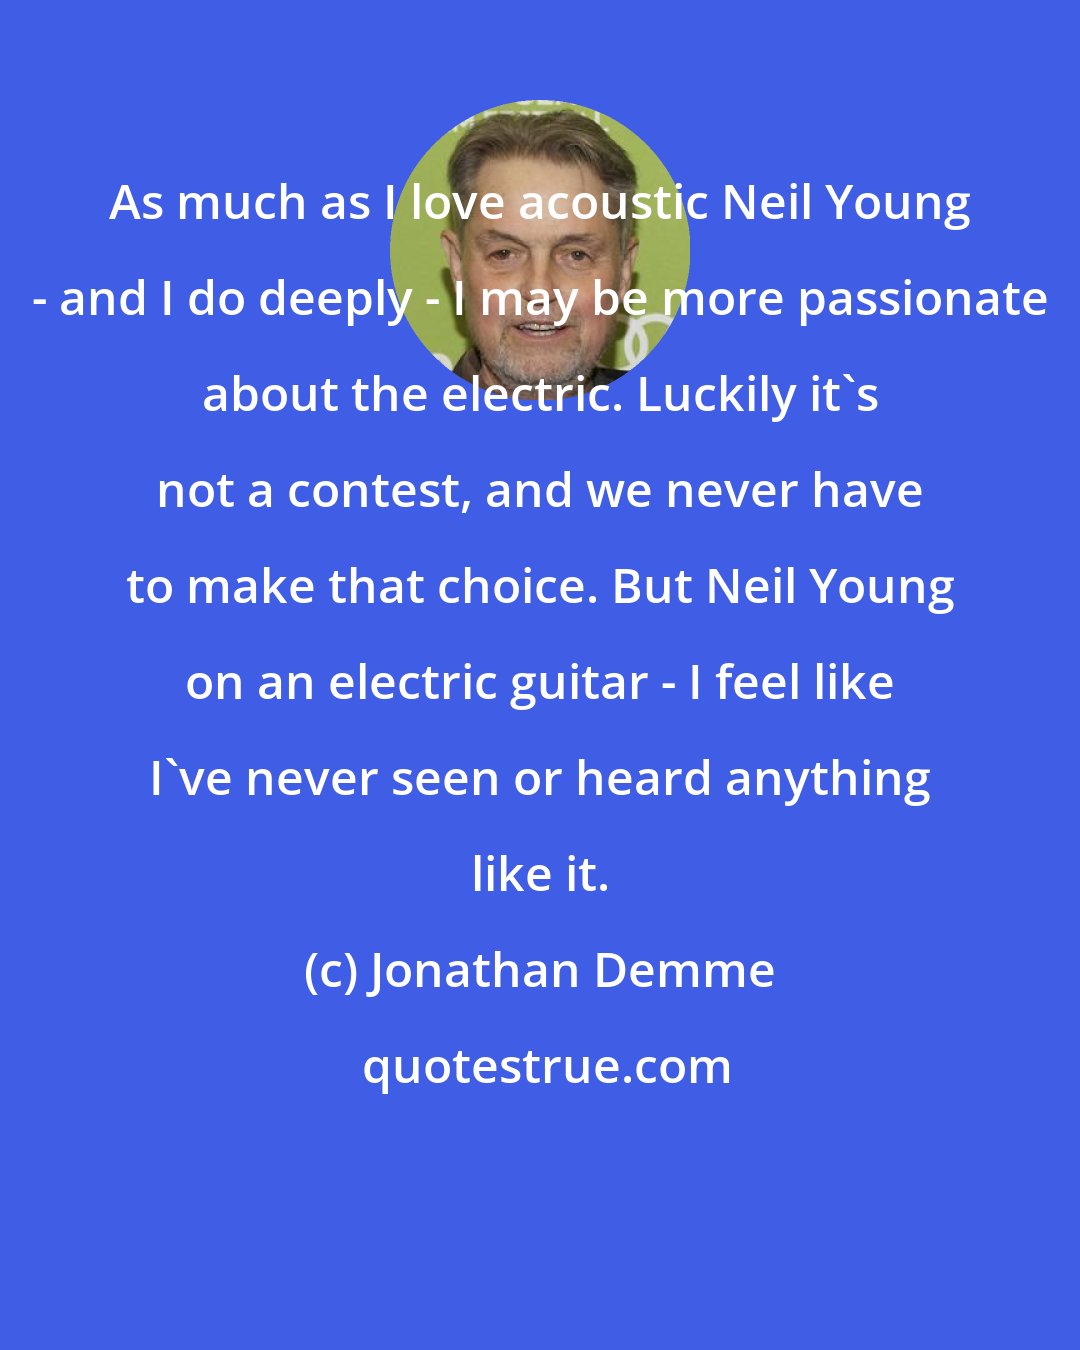 Jonathan Demme: As much as I love acoustic Neil Young - and I do deeply - I may be more passionate about the electric. Luckily it's not a contest, and we never have to make that choice. But Neil Young on an electric guitar - I feel like I've never seen or heard anything like it.